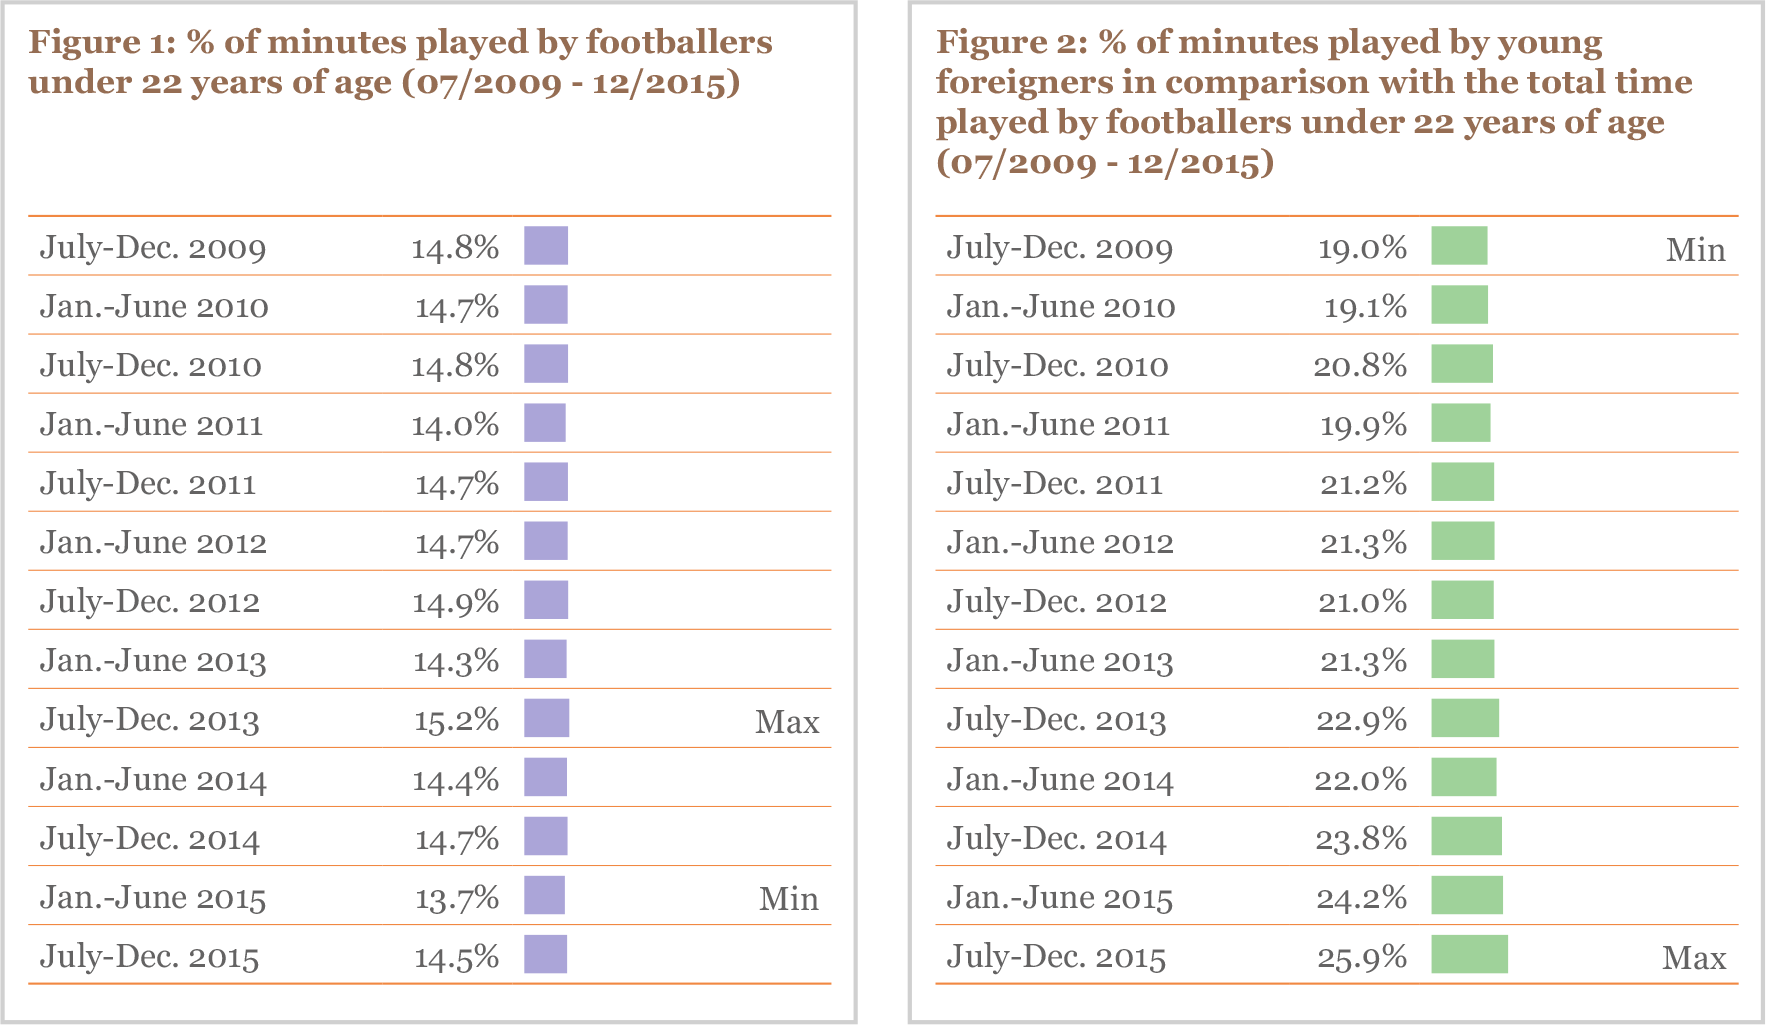 % of minutes played by footballers under 22 years of age (07/2009 - 12/2015)